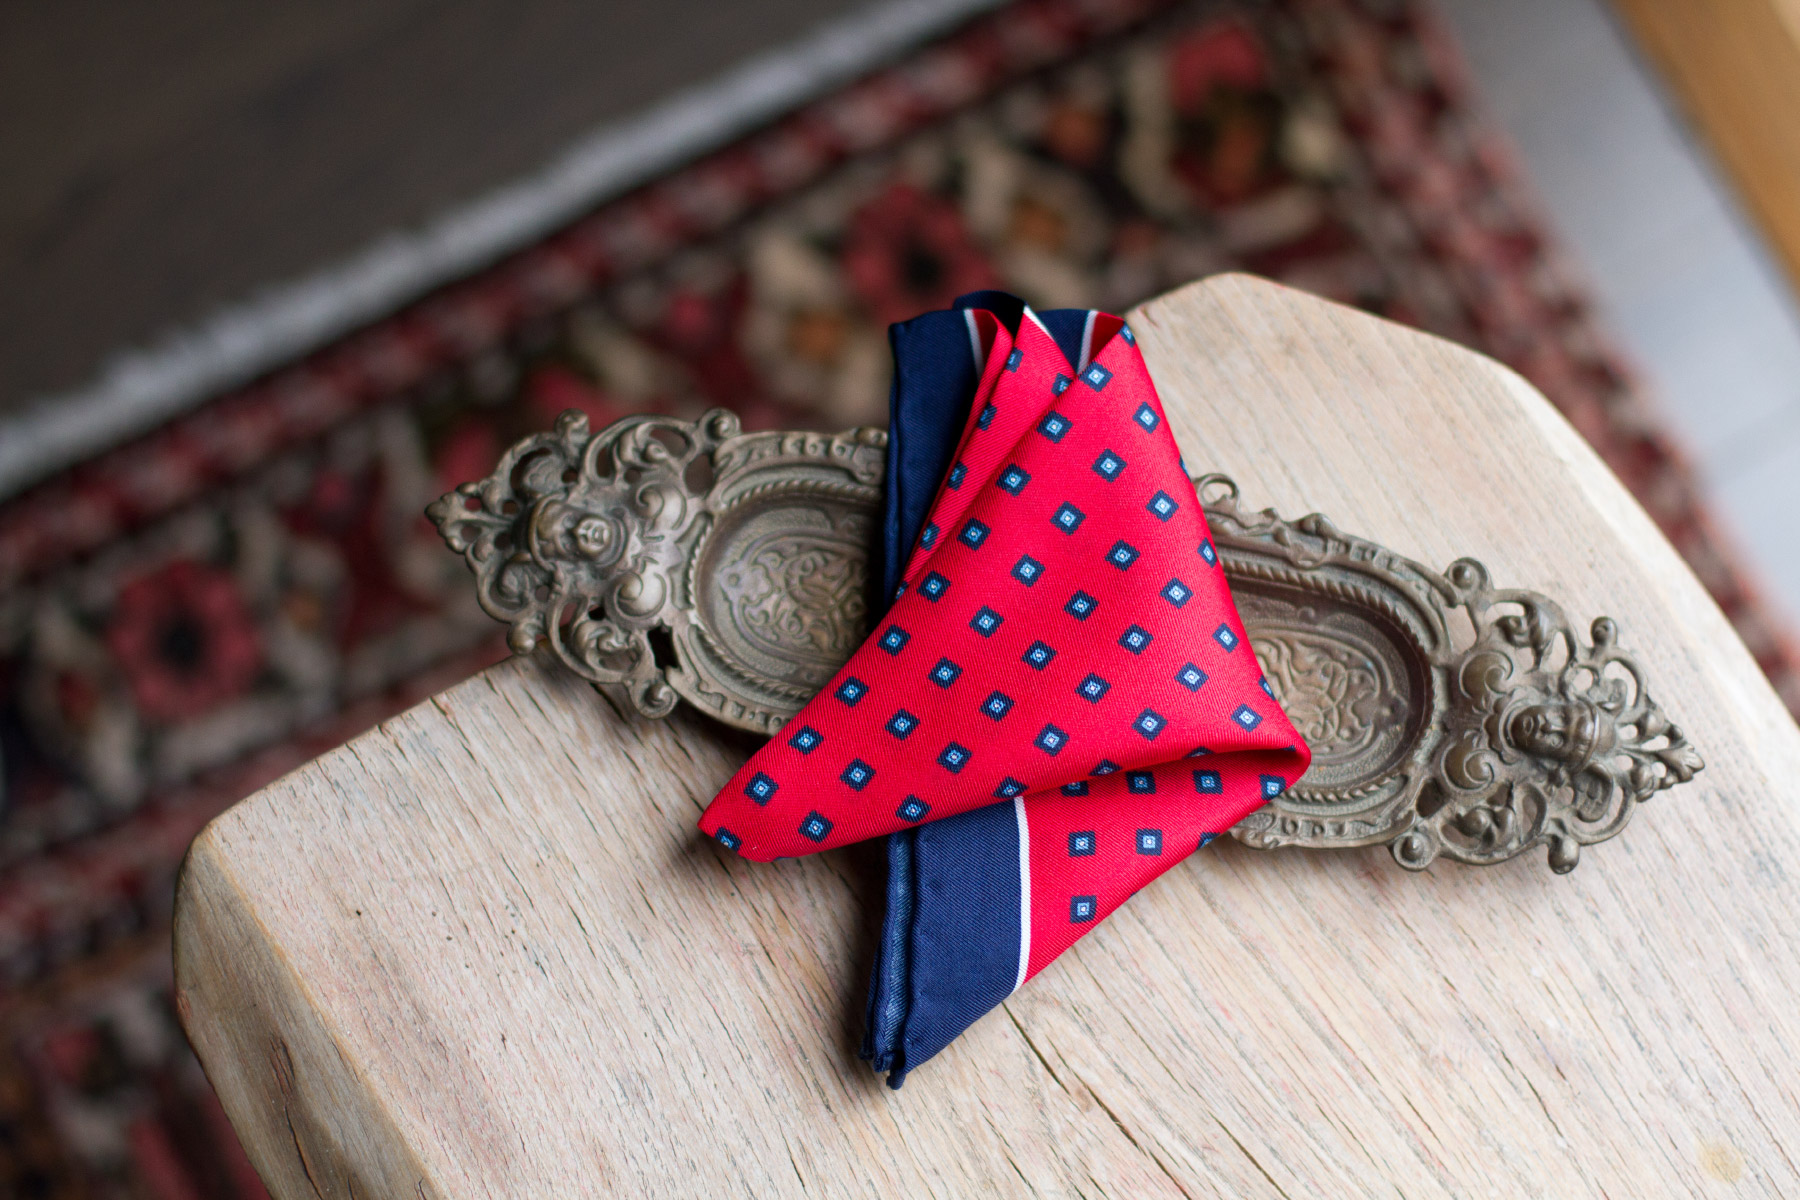 Fuze-Branding-Small-Business-Product-Lifestyle-Photography-Bespoke-Suit-Company-Evolution-Of-Style-Pocket-Square-Accessory-Styling-Red-Blue-Paisley